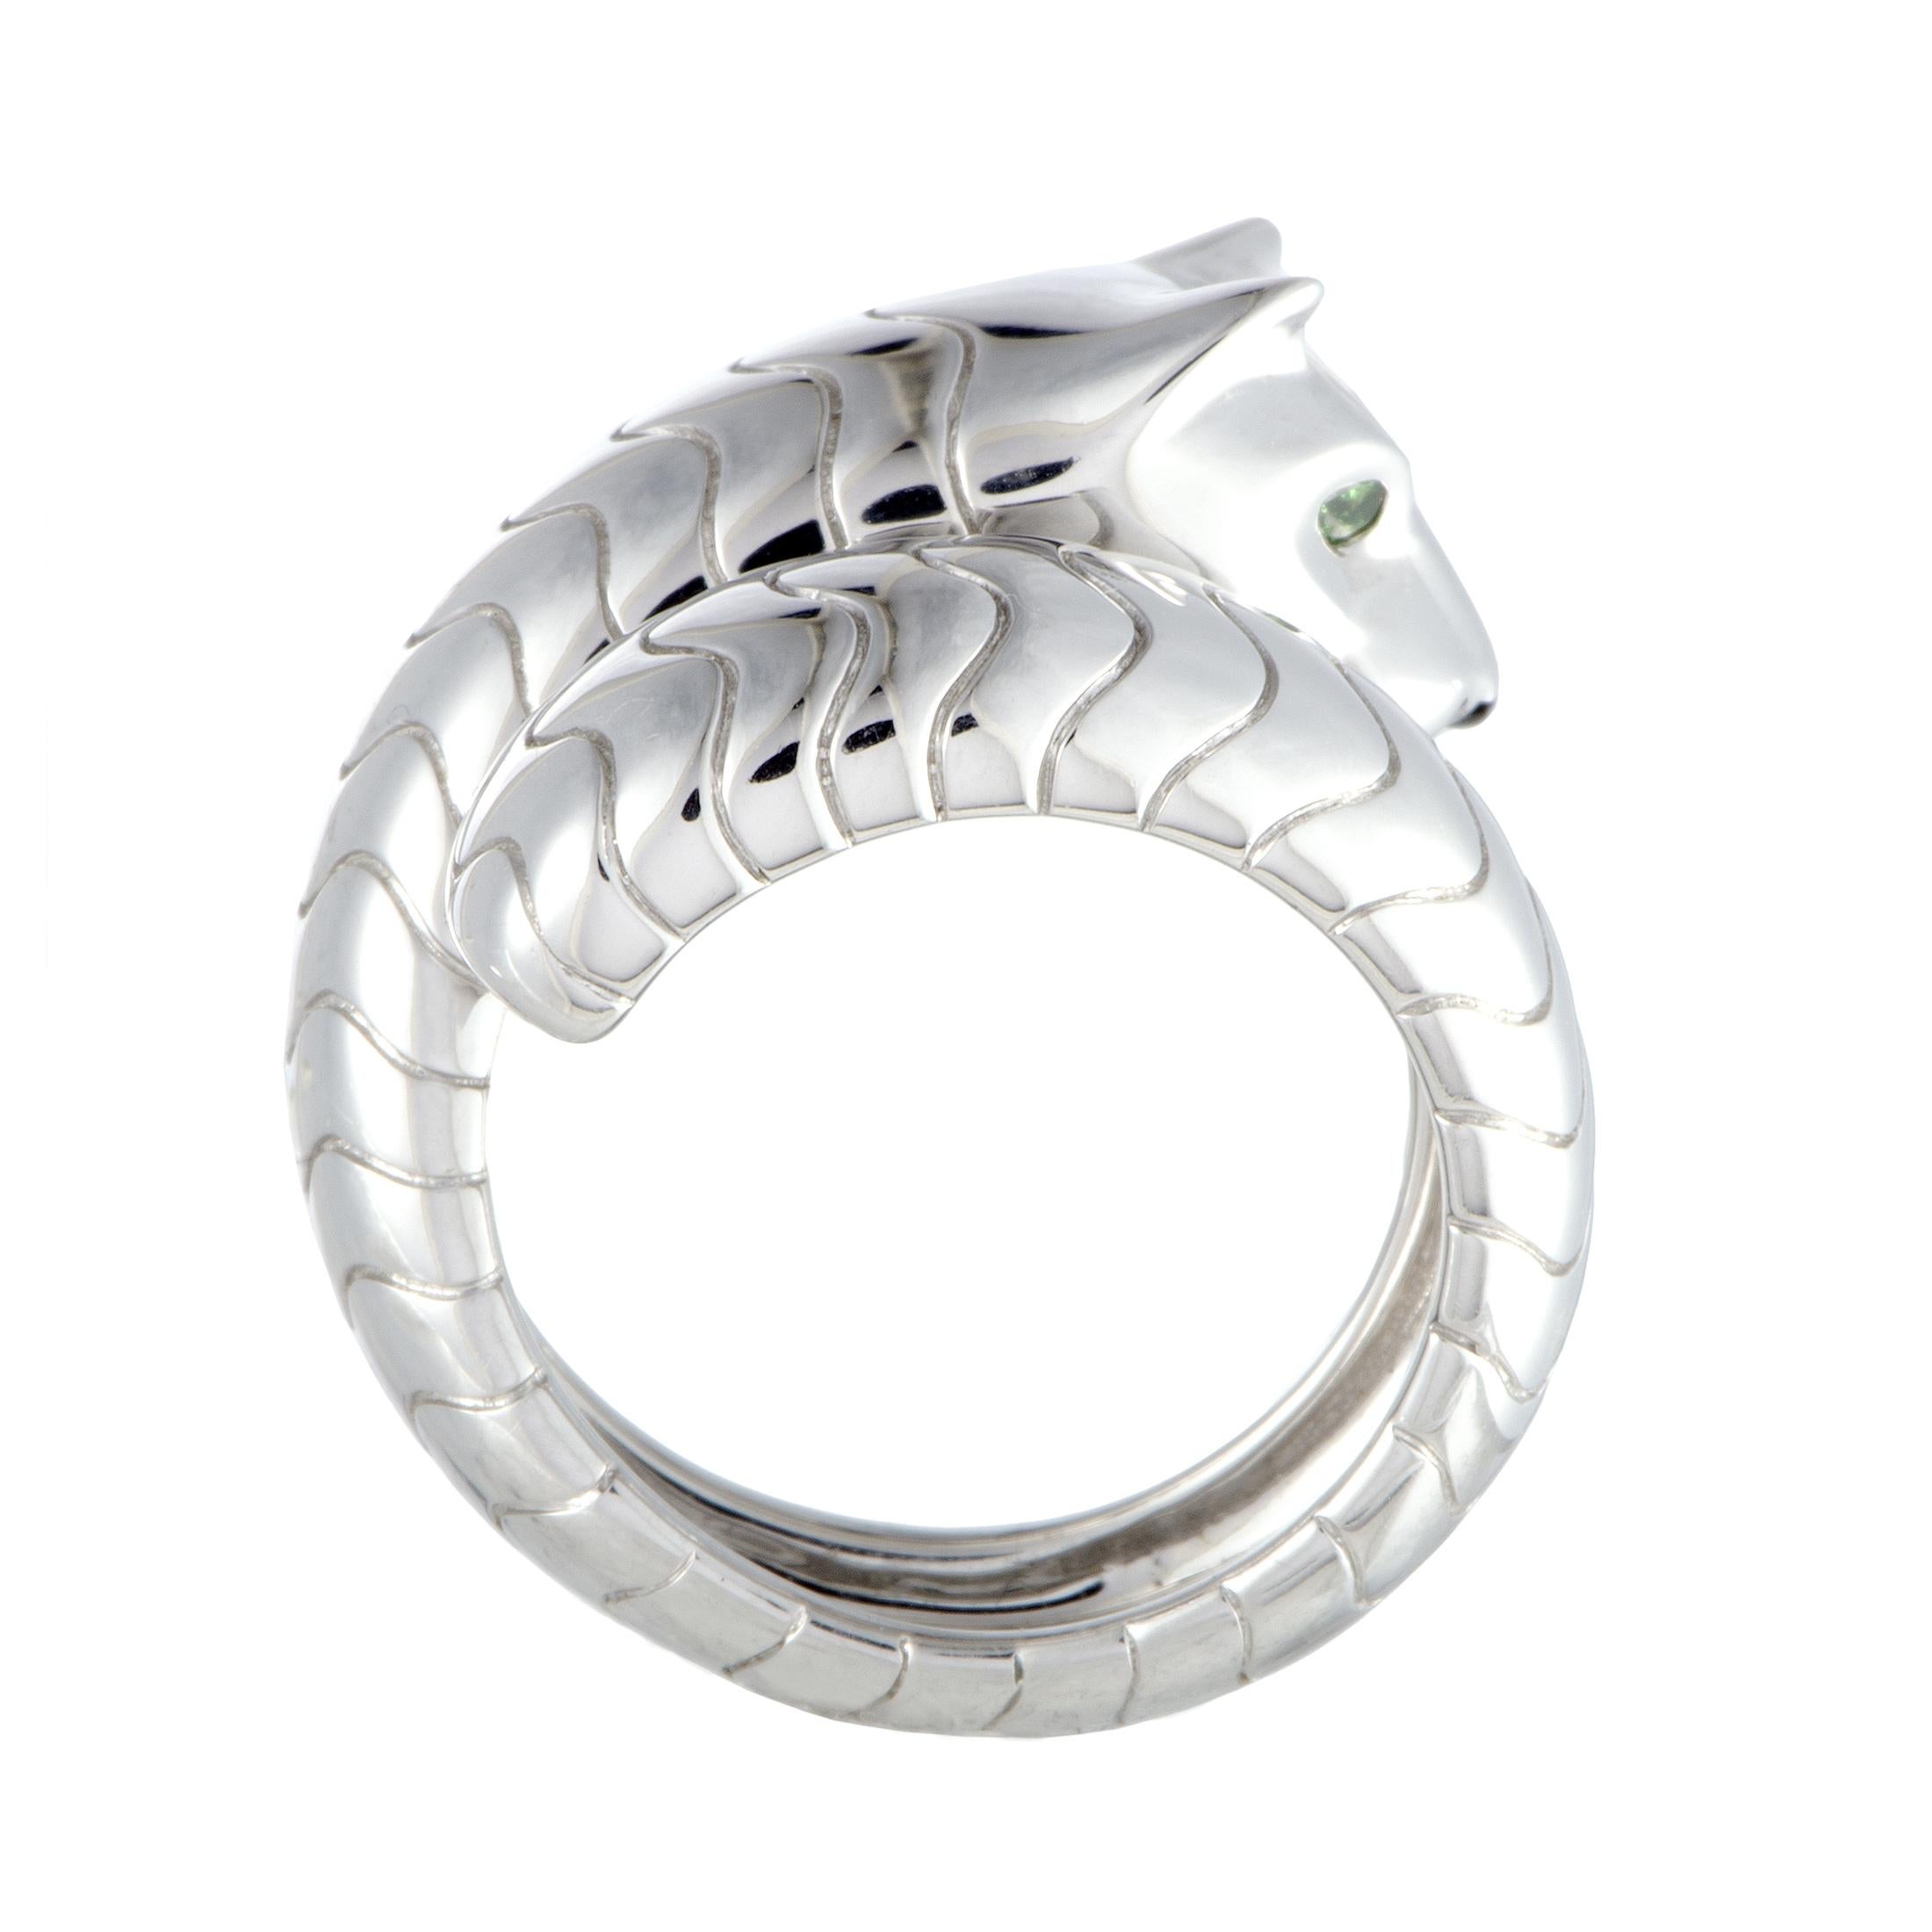 From the iconic “Panthère” collection by Cartier comes this sublime piece made of 18K white gold that boasts superb craftsmanship quality and extraordinary design. The ring is decorated with onyx and tsavorite stones.
 Ring Top Dimensions: 22mm x